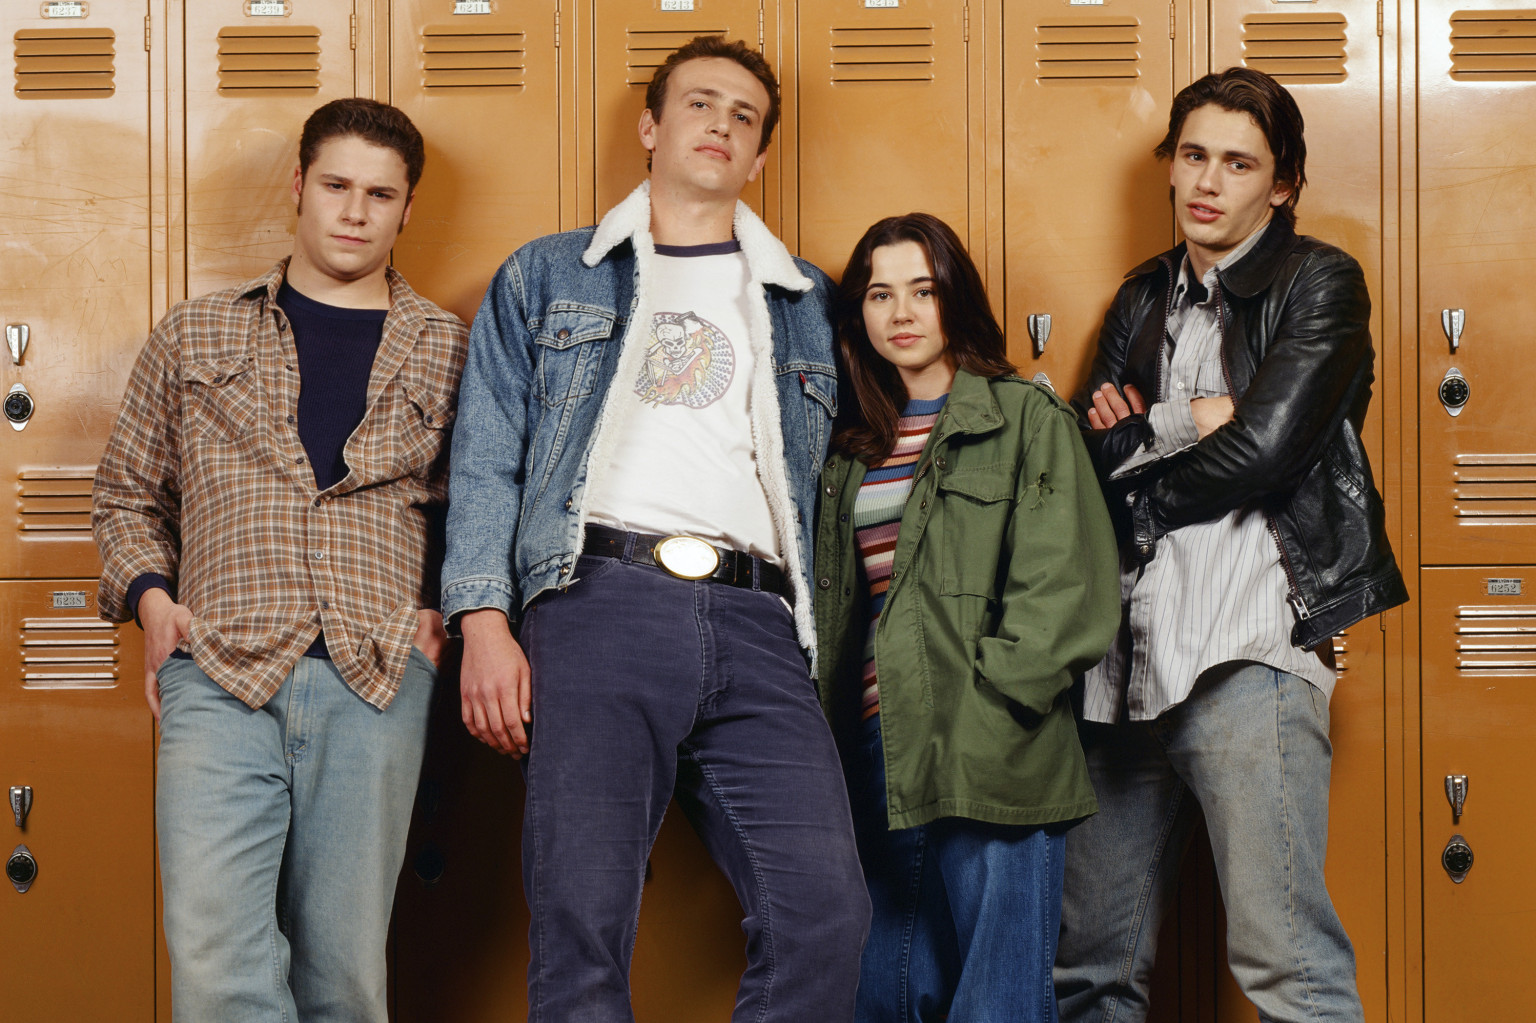 6 Life Lessons From 'Freaks & Geeks' (GIFs) | HuffPost